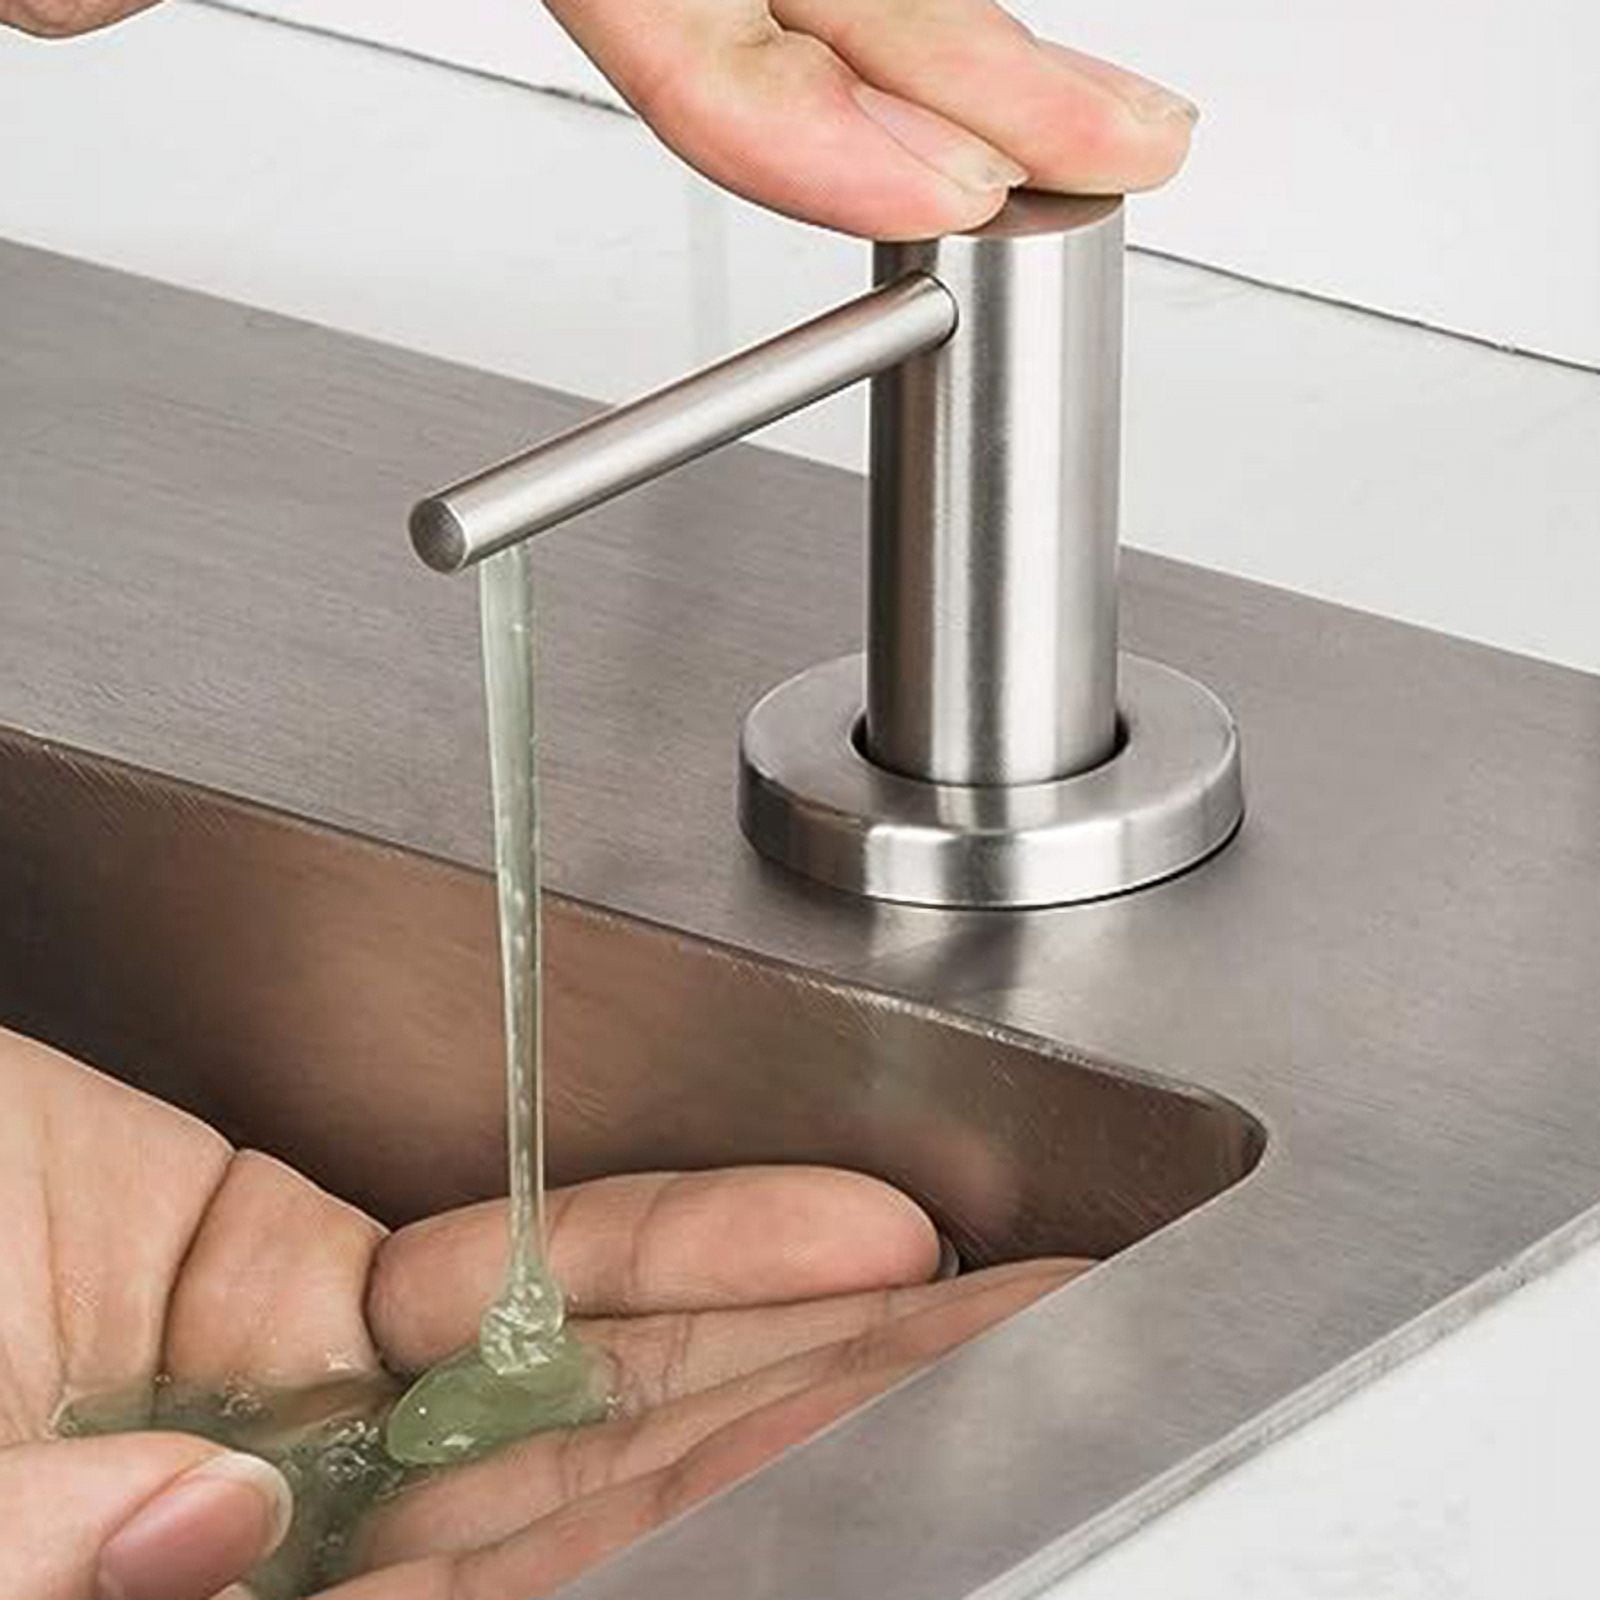 SAMODRA Soap/Lotion Dispenser for Kitchen Sink, Brass Pump Brushed Nickel  Finish Built in Design with 39” Extension Tube Directly to Soap Bottle, No  More Messy Refills(No Bottle) by SAMODRA - Shop Online